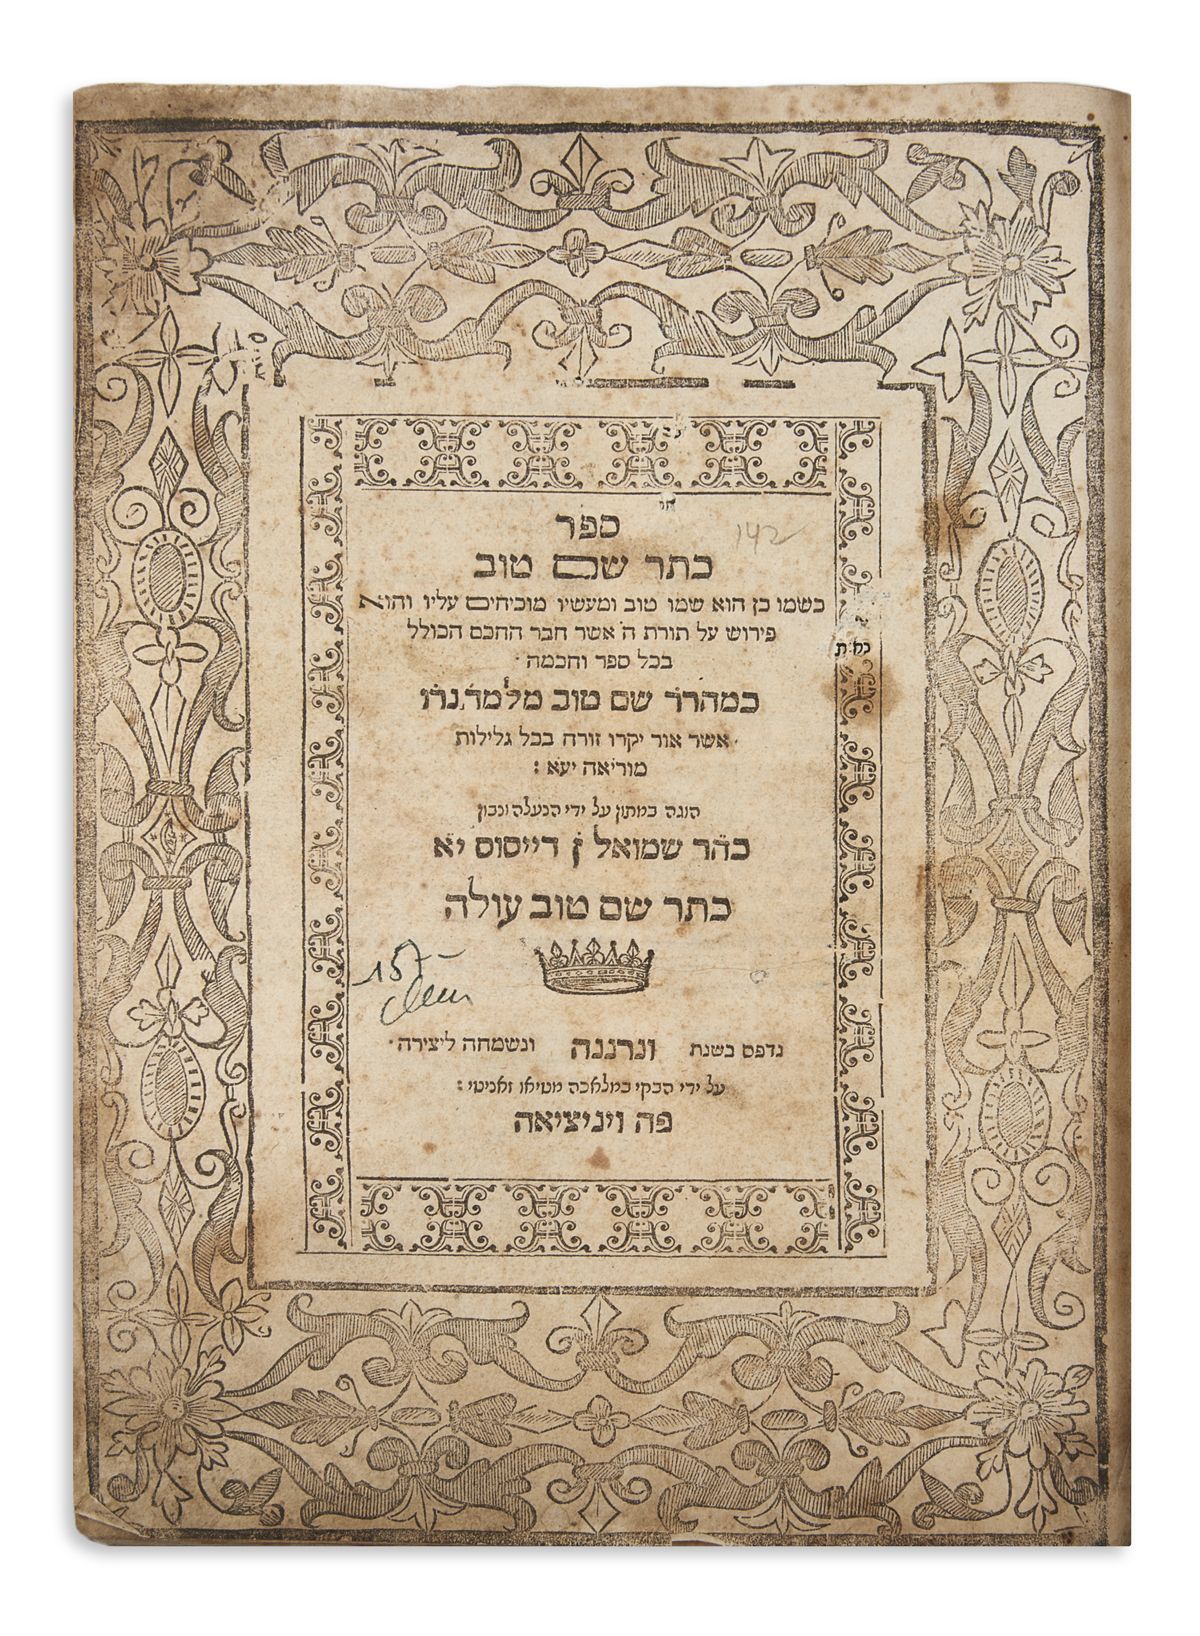 Kether Shem Tov [commentary to the Chumash].